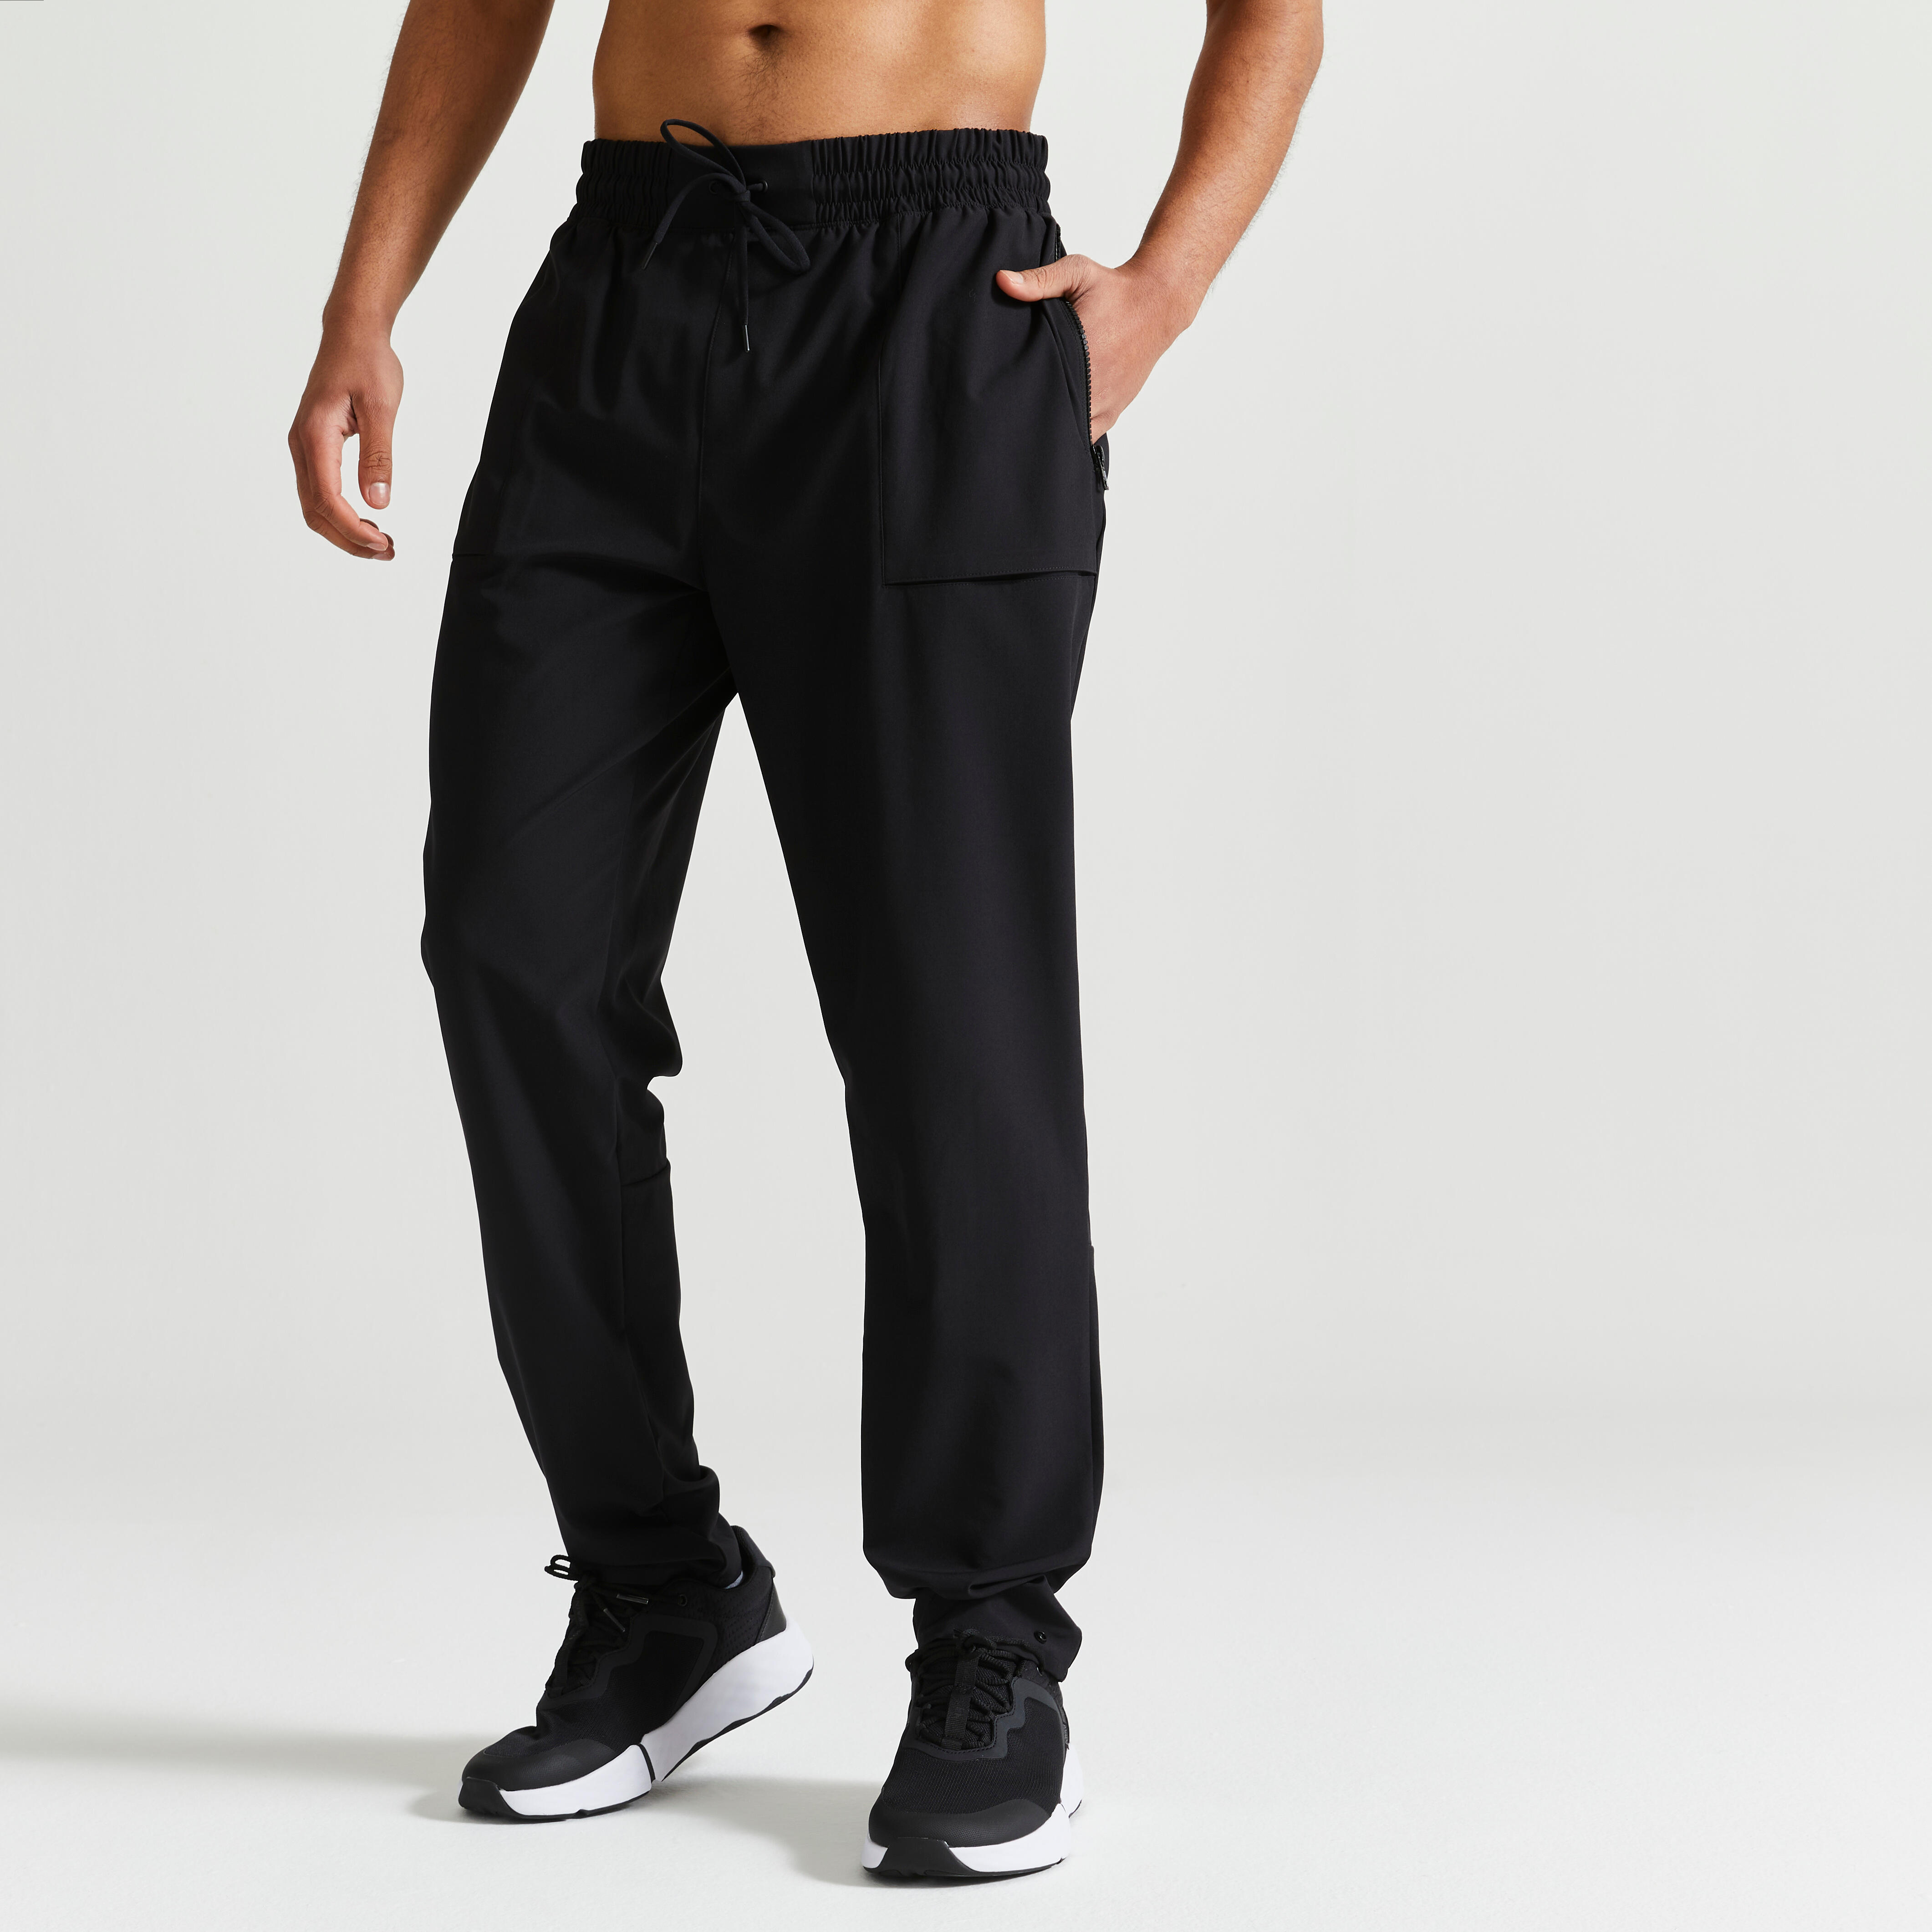 FLX by Decathlon Solid Men Grey Track Pants - Buy FLX by Decathlon Solid Men  Grey Track Pants Online at Best Prices in India | Flipkart.com